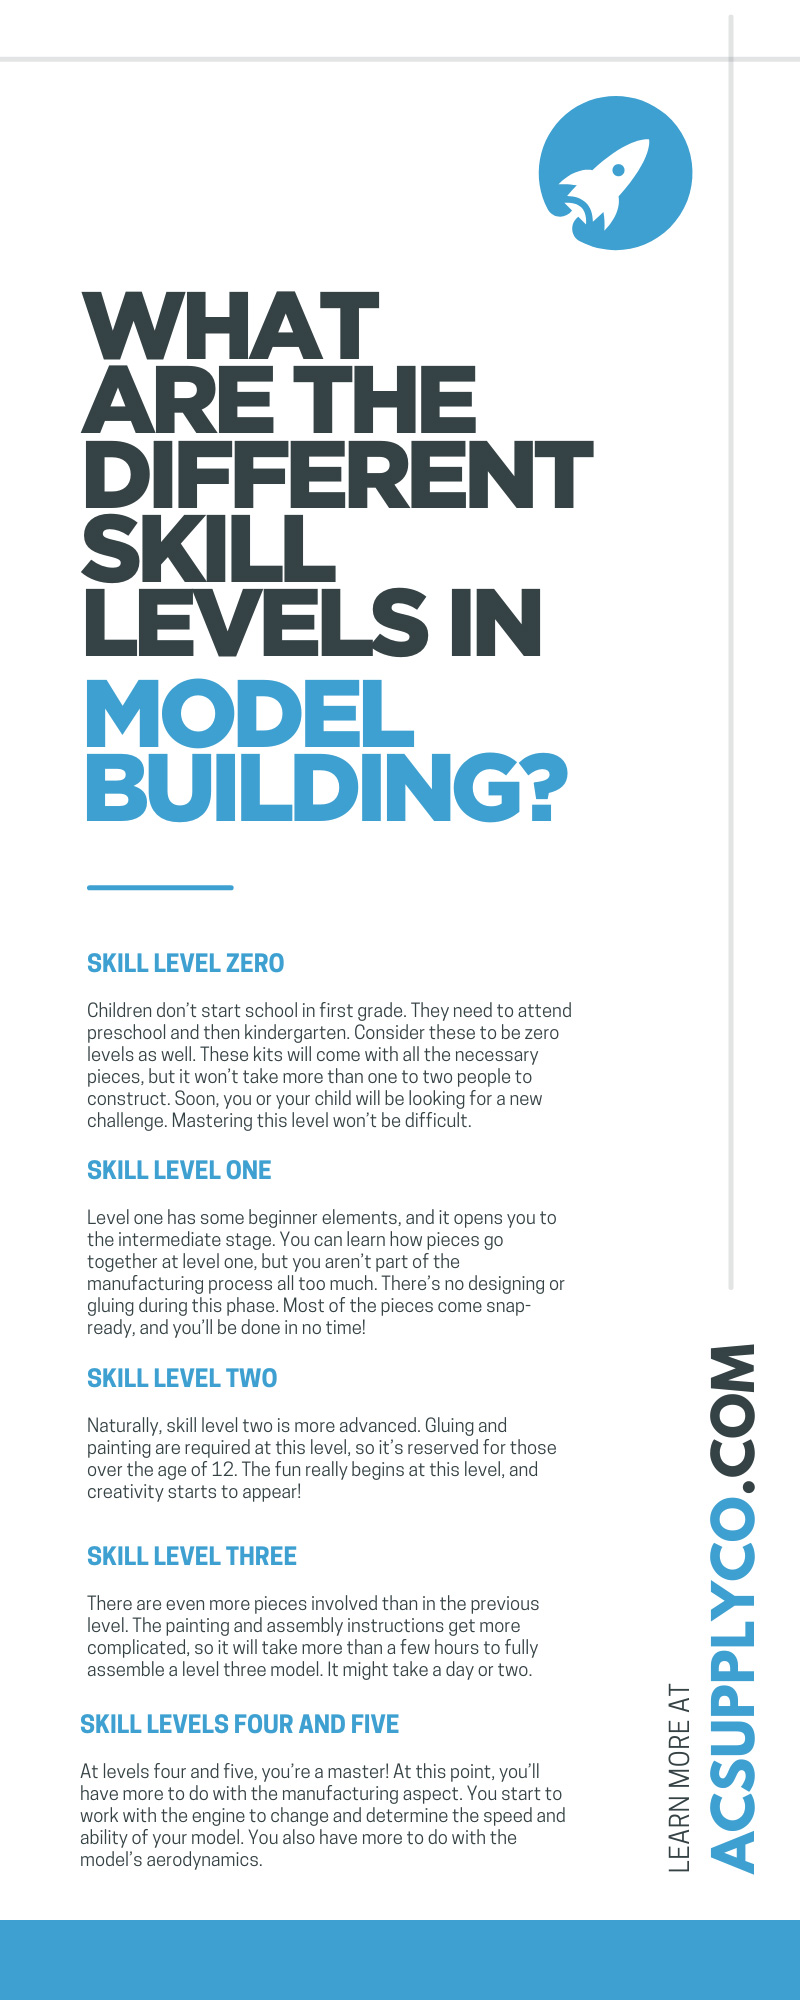 What Are the Different Skill Levels in Model Building?